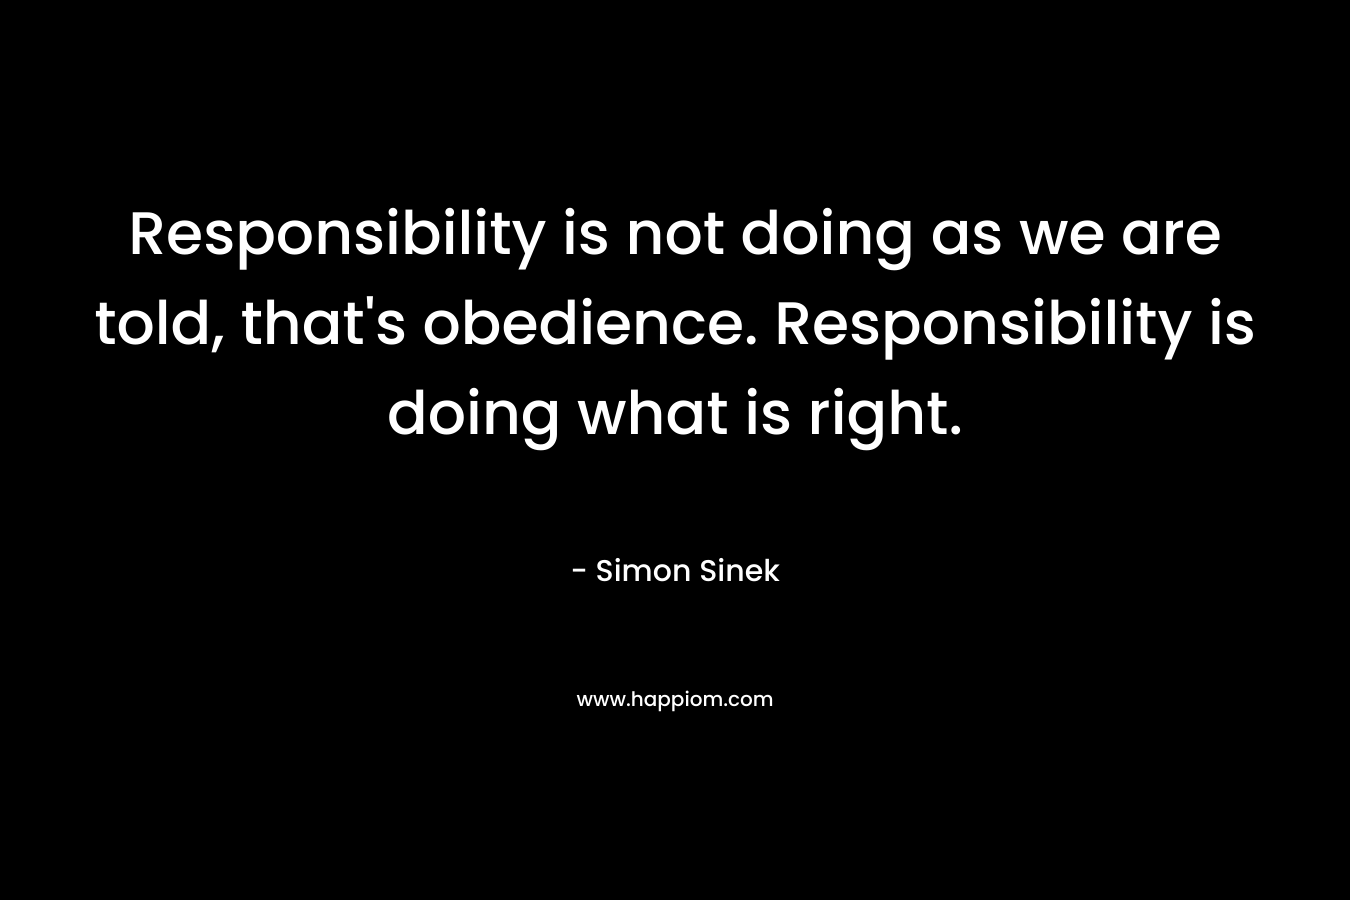 Responsibility is not doing as we are told, that's obedience. Responsibility is doing what is right.